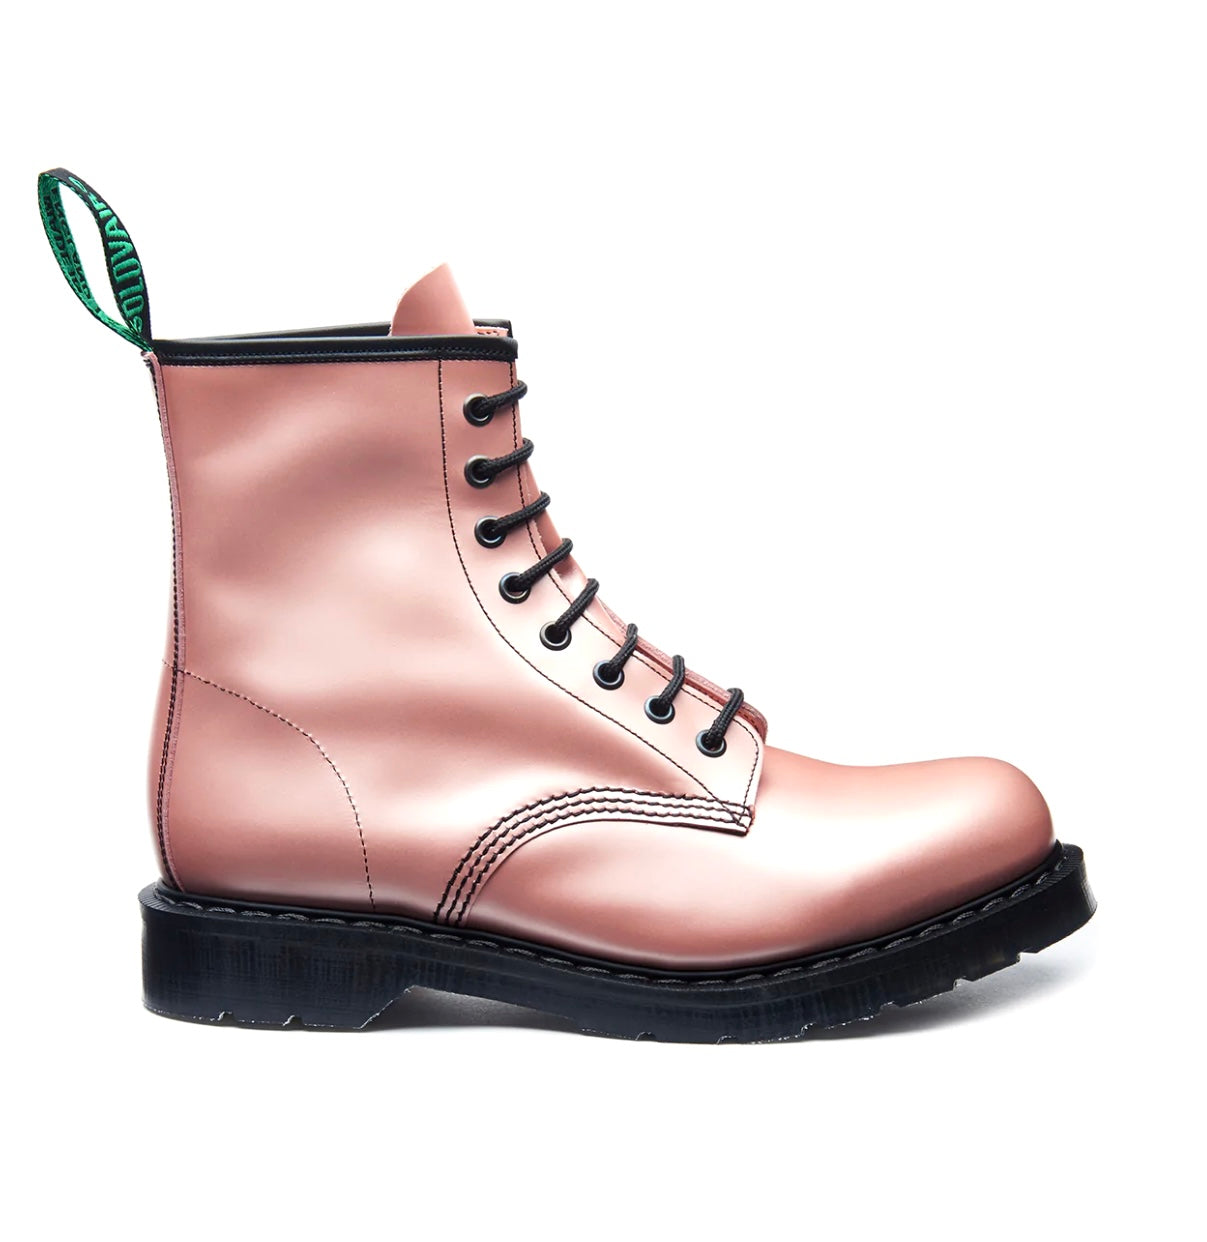 Solovair Iridescent Pink Hi-Shine 8 Eyelet Boot Made In England